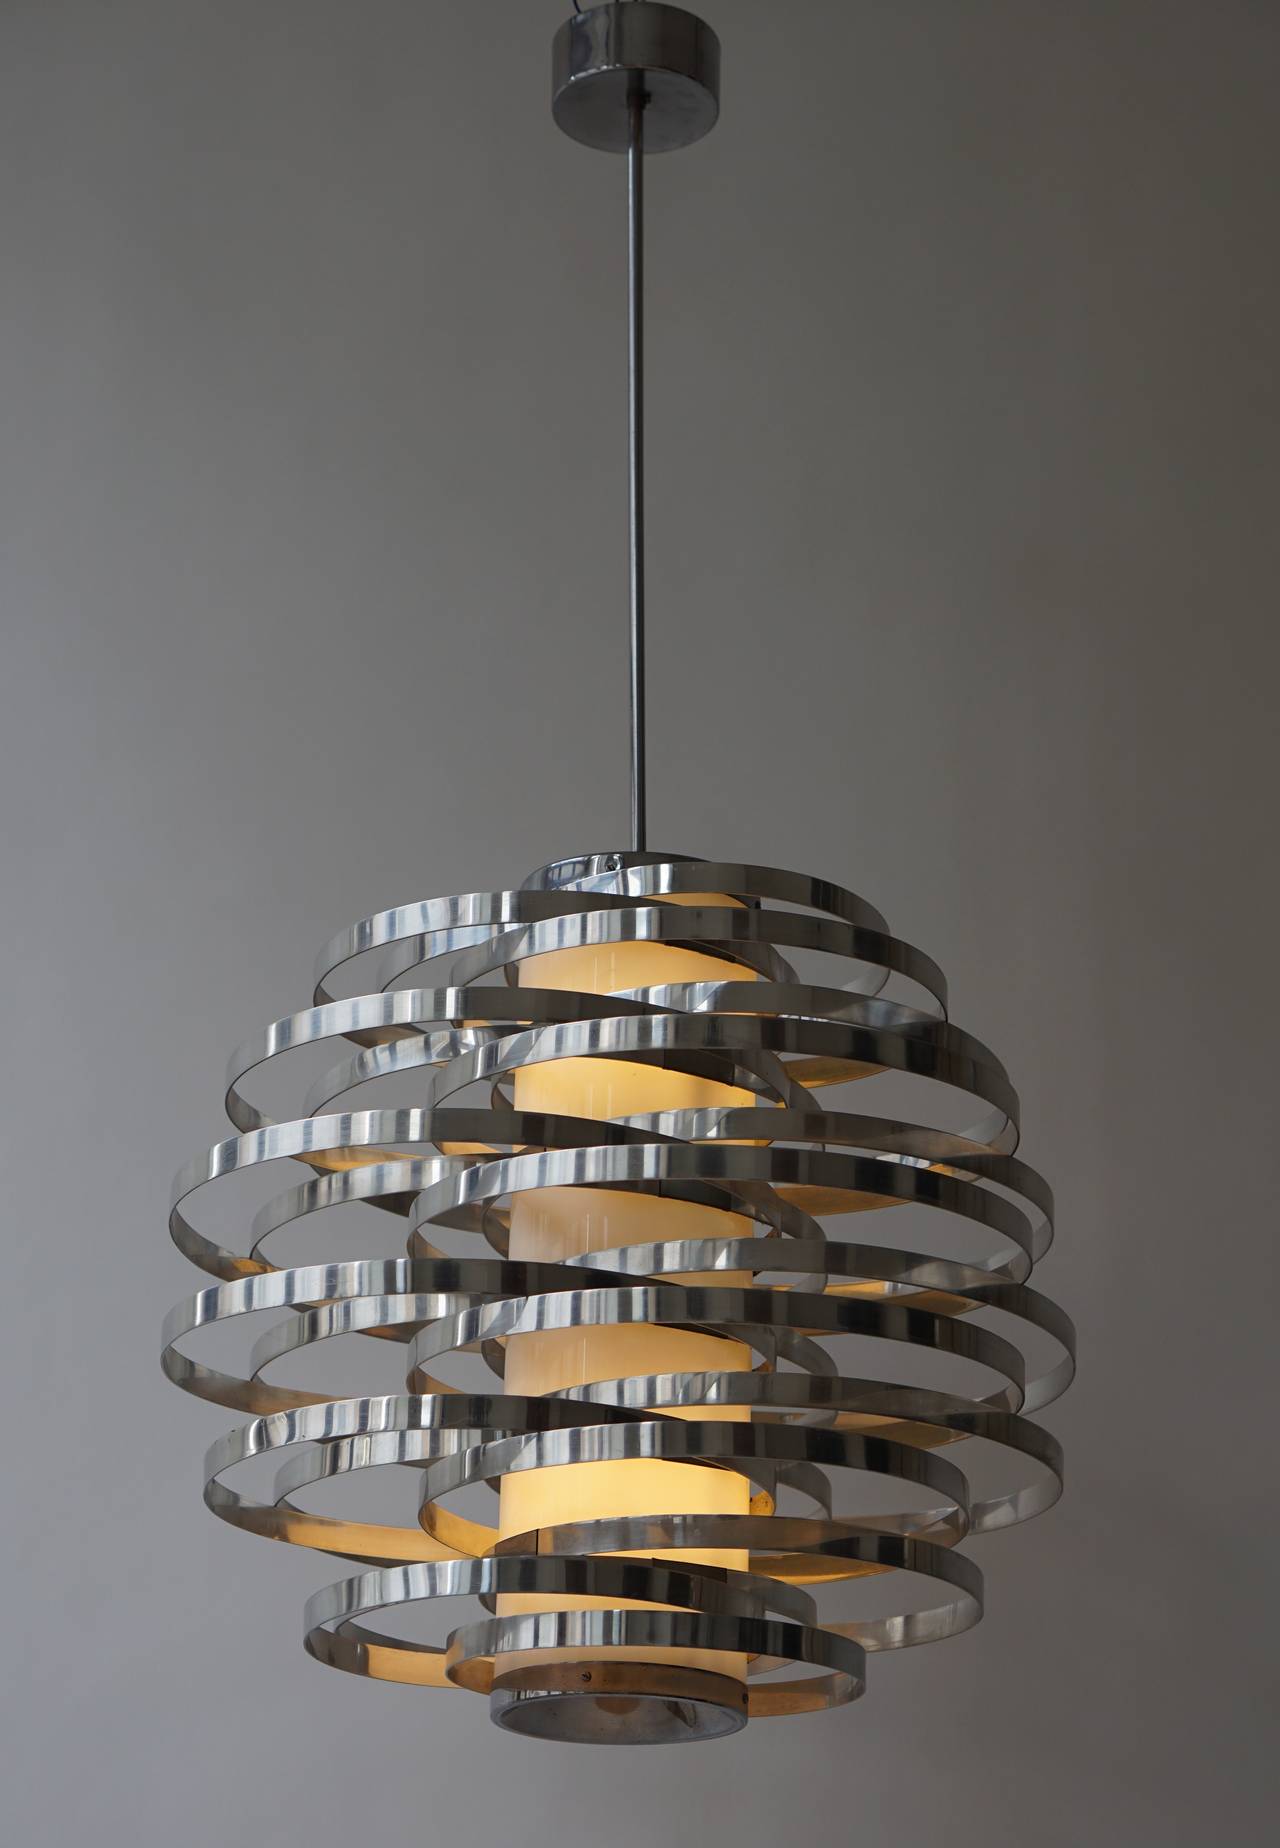 Chandelier of aluminium bands encircling an acrylic tube, with single bulb, on chrome stem. Sciolari, Italy, 1960s.
This is the large model.